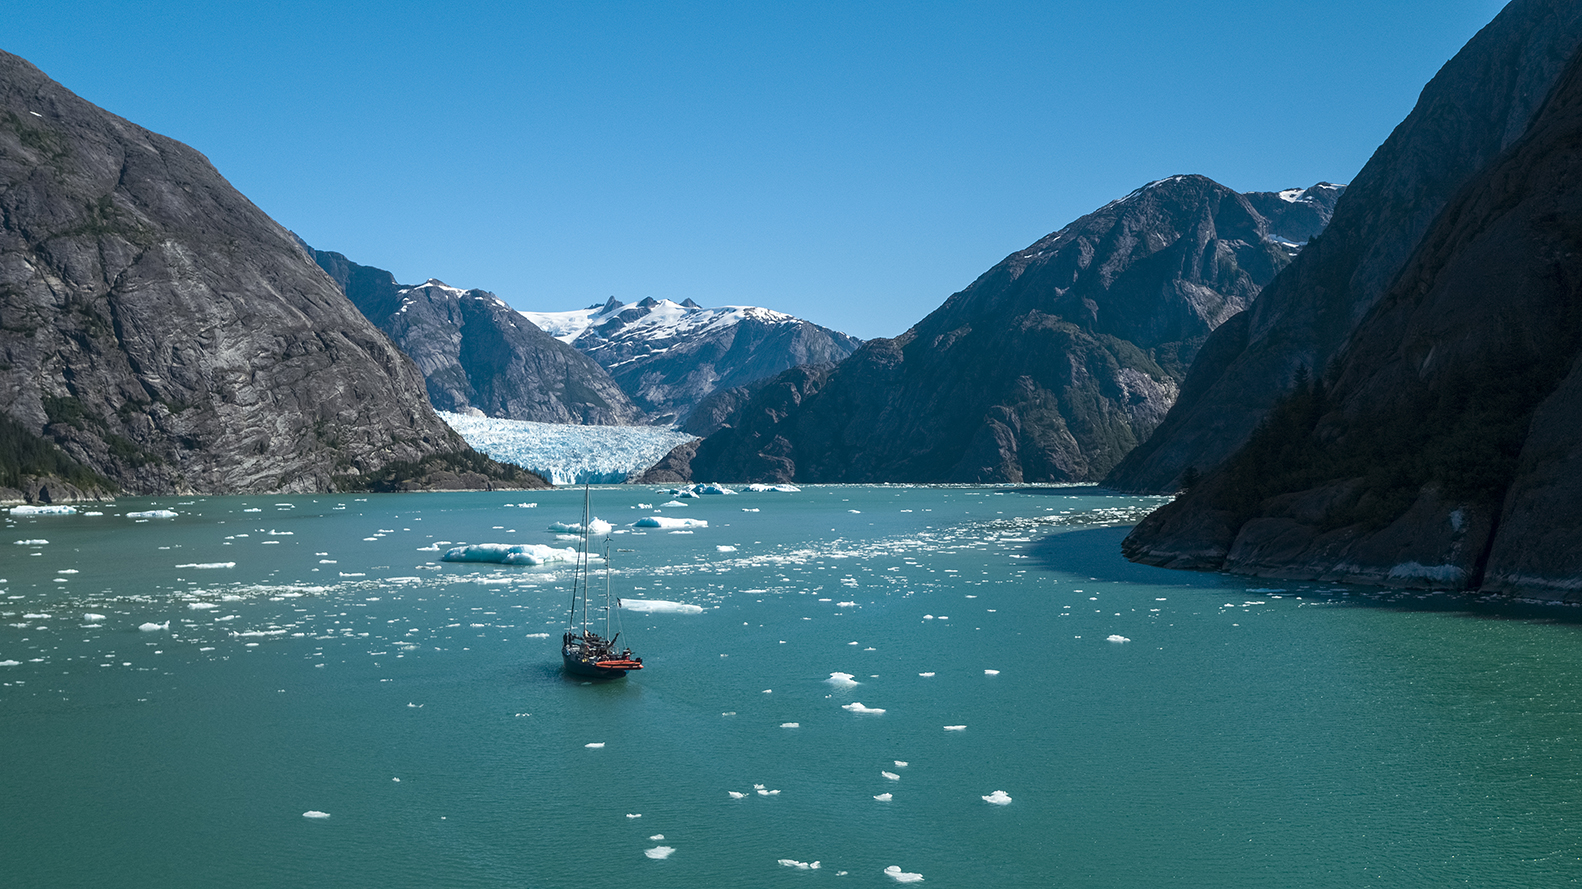 Panorama of sailing boat in bay, with mountains and glaciers